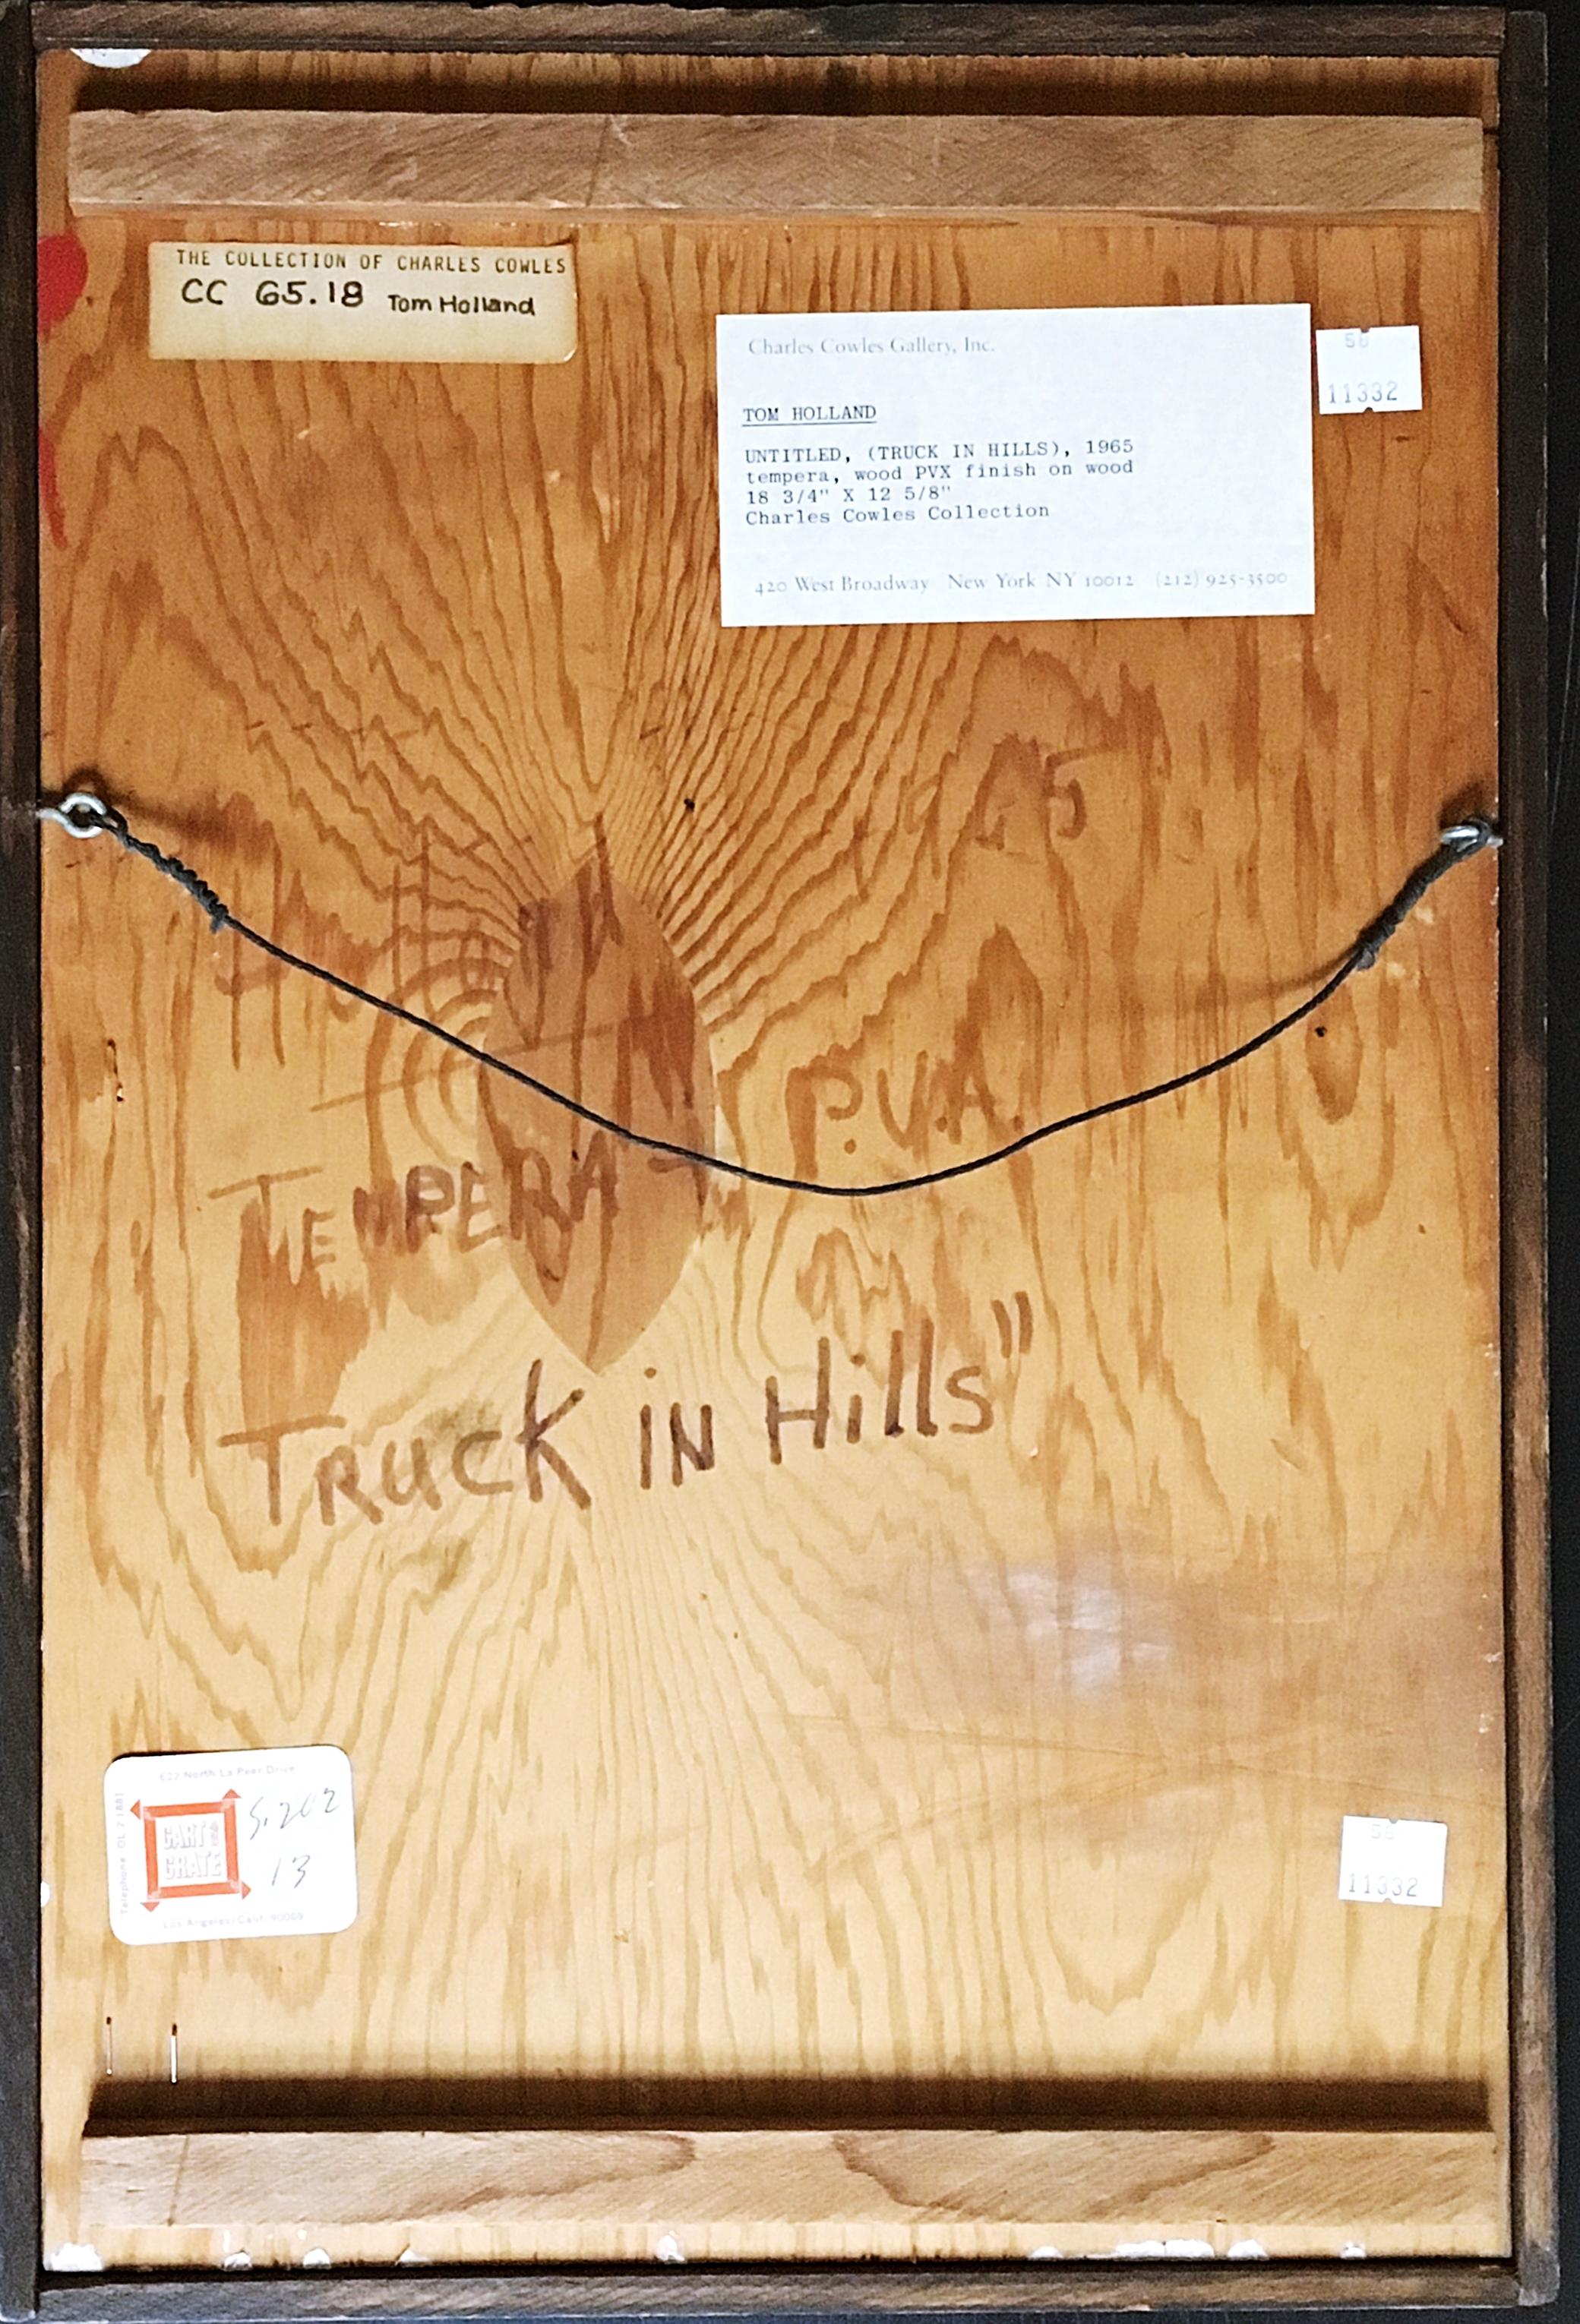 Untitled (Truck in Hills) with original Charles Cowles Gallery label  - Abstract Painting by Tom Holland